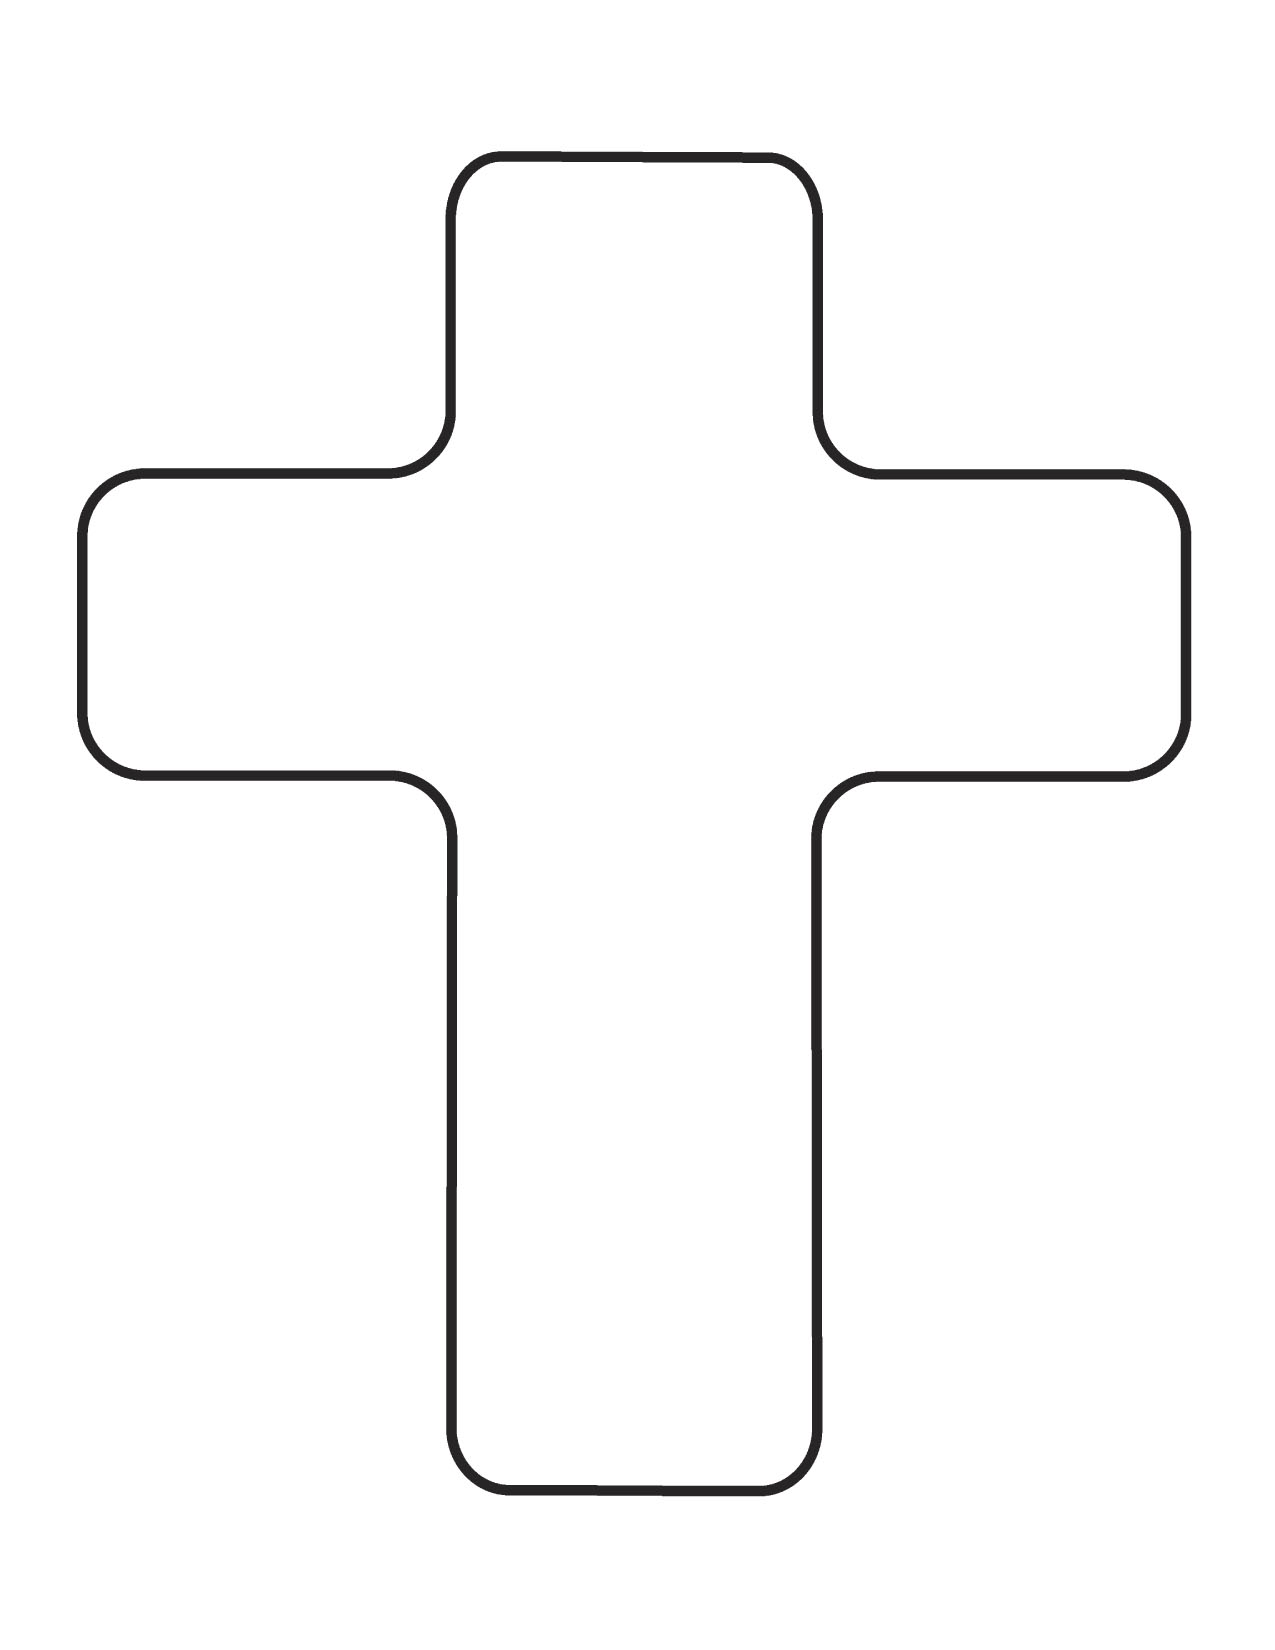 Crucifix Clipart Black And White | Clipart Panda - Free Clipart Images